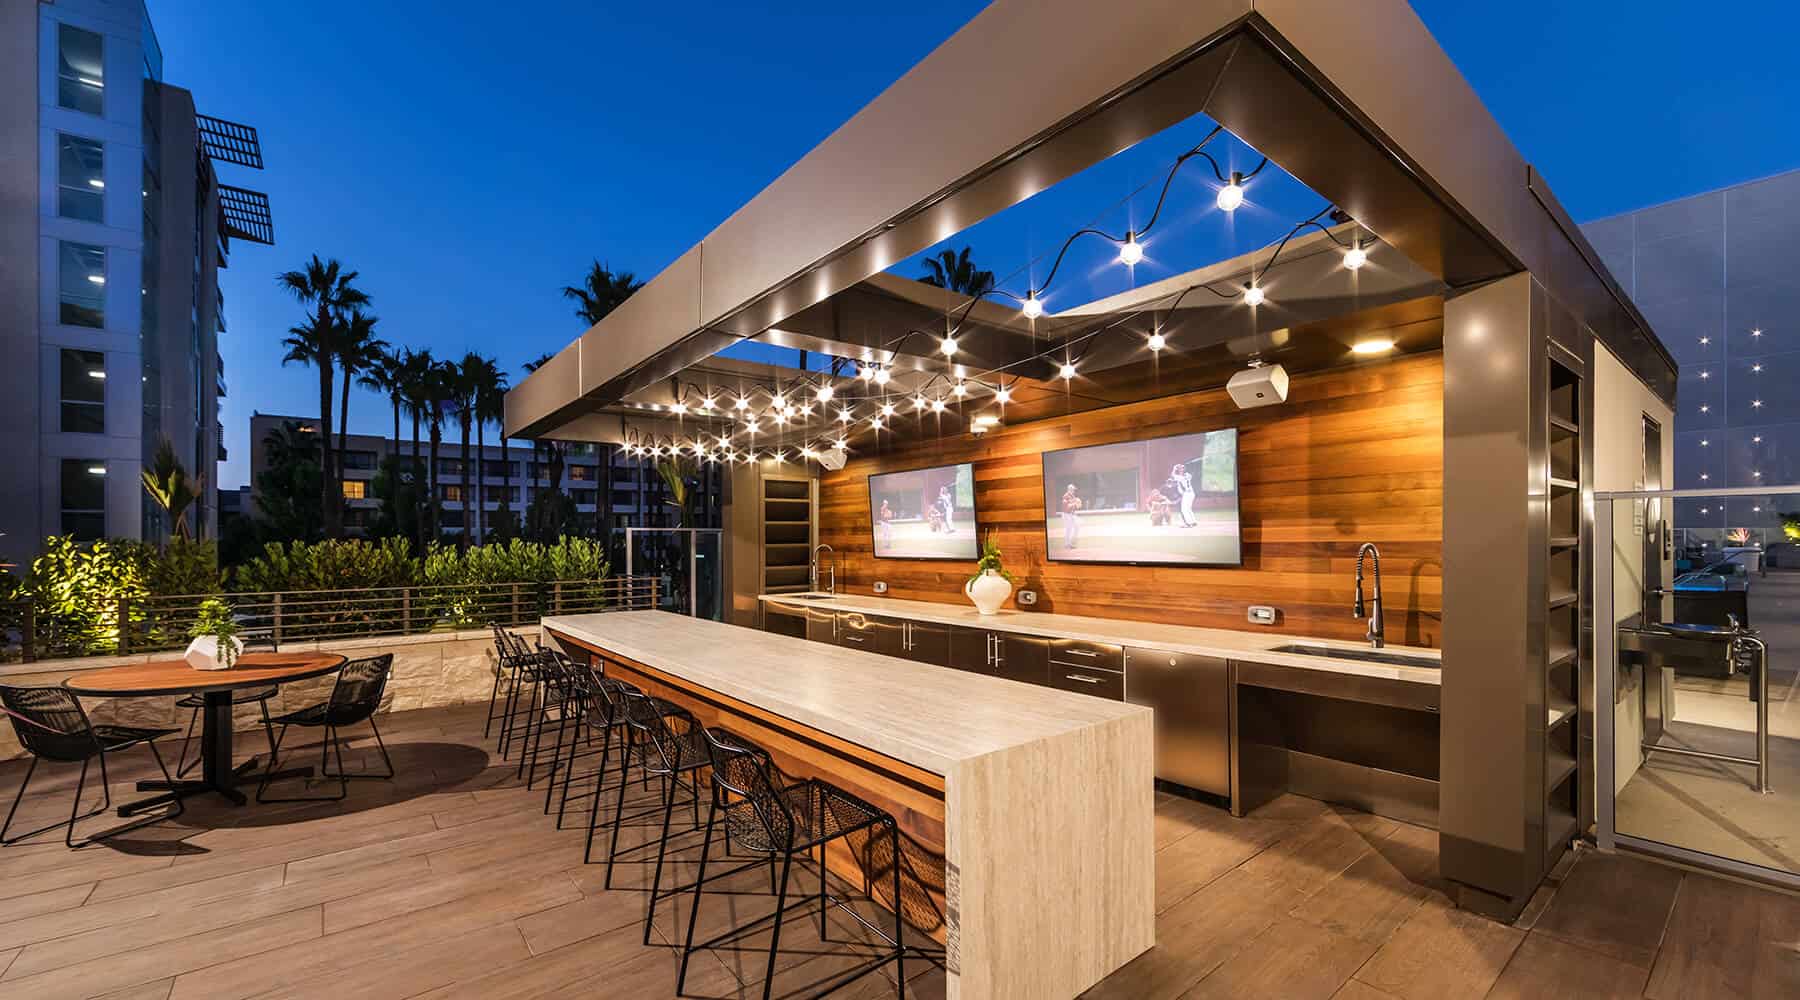 Outdoor kitchen at 580 Anton Apartments featuring a seating area, sink, and flat-screen TVs.